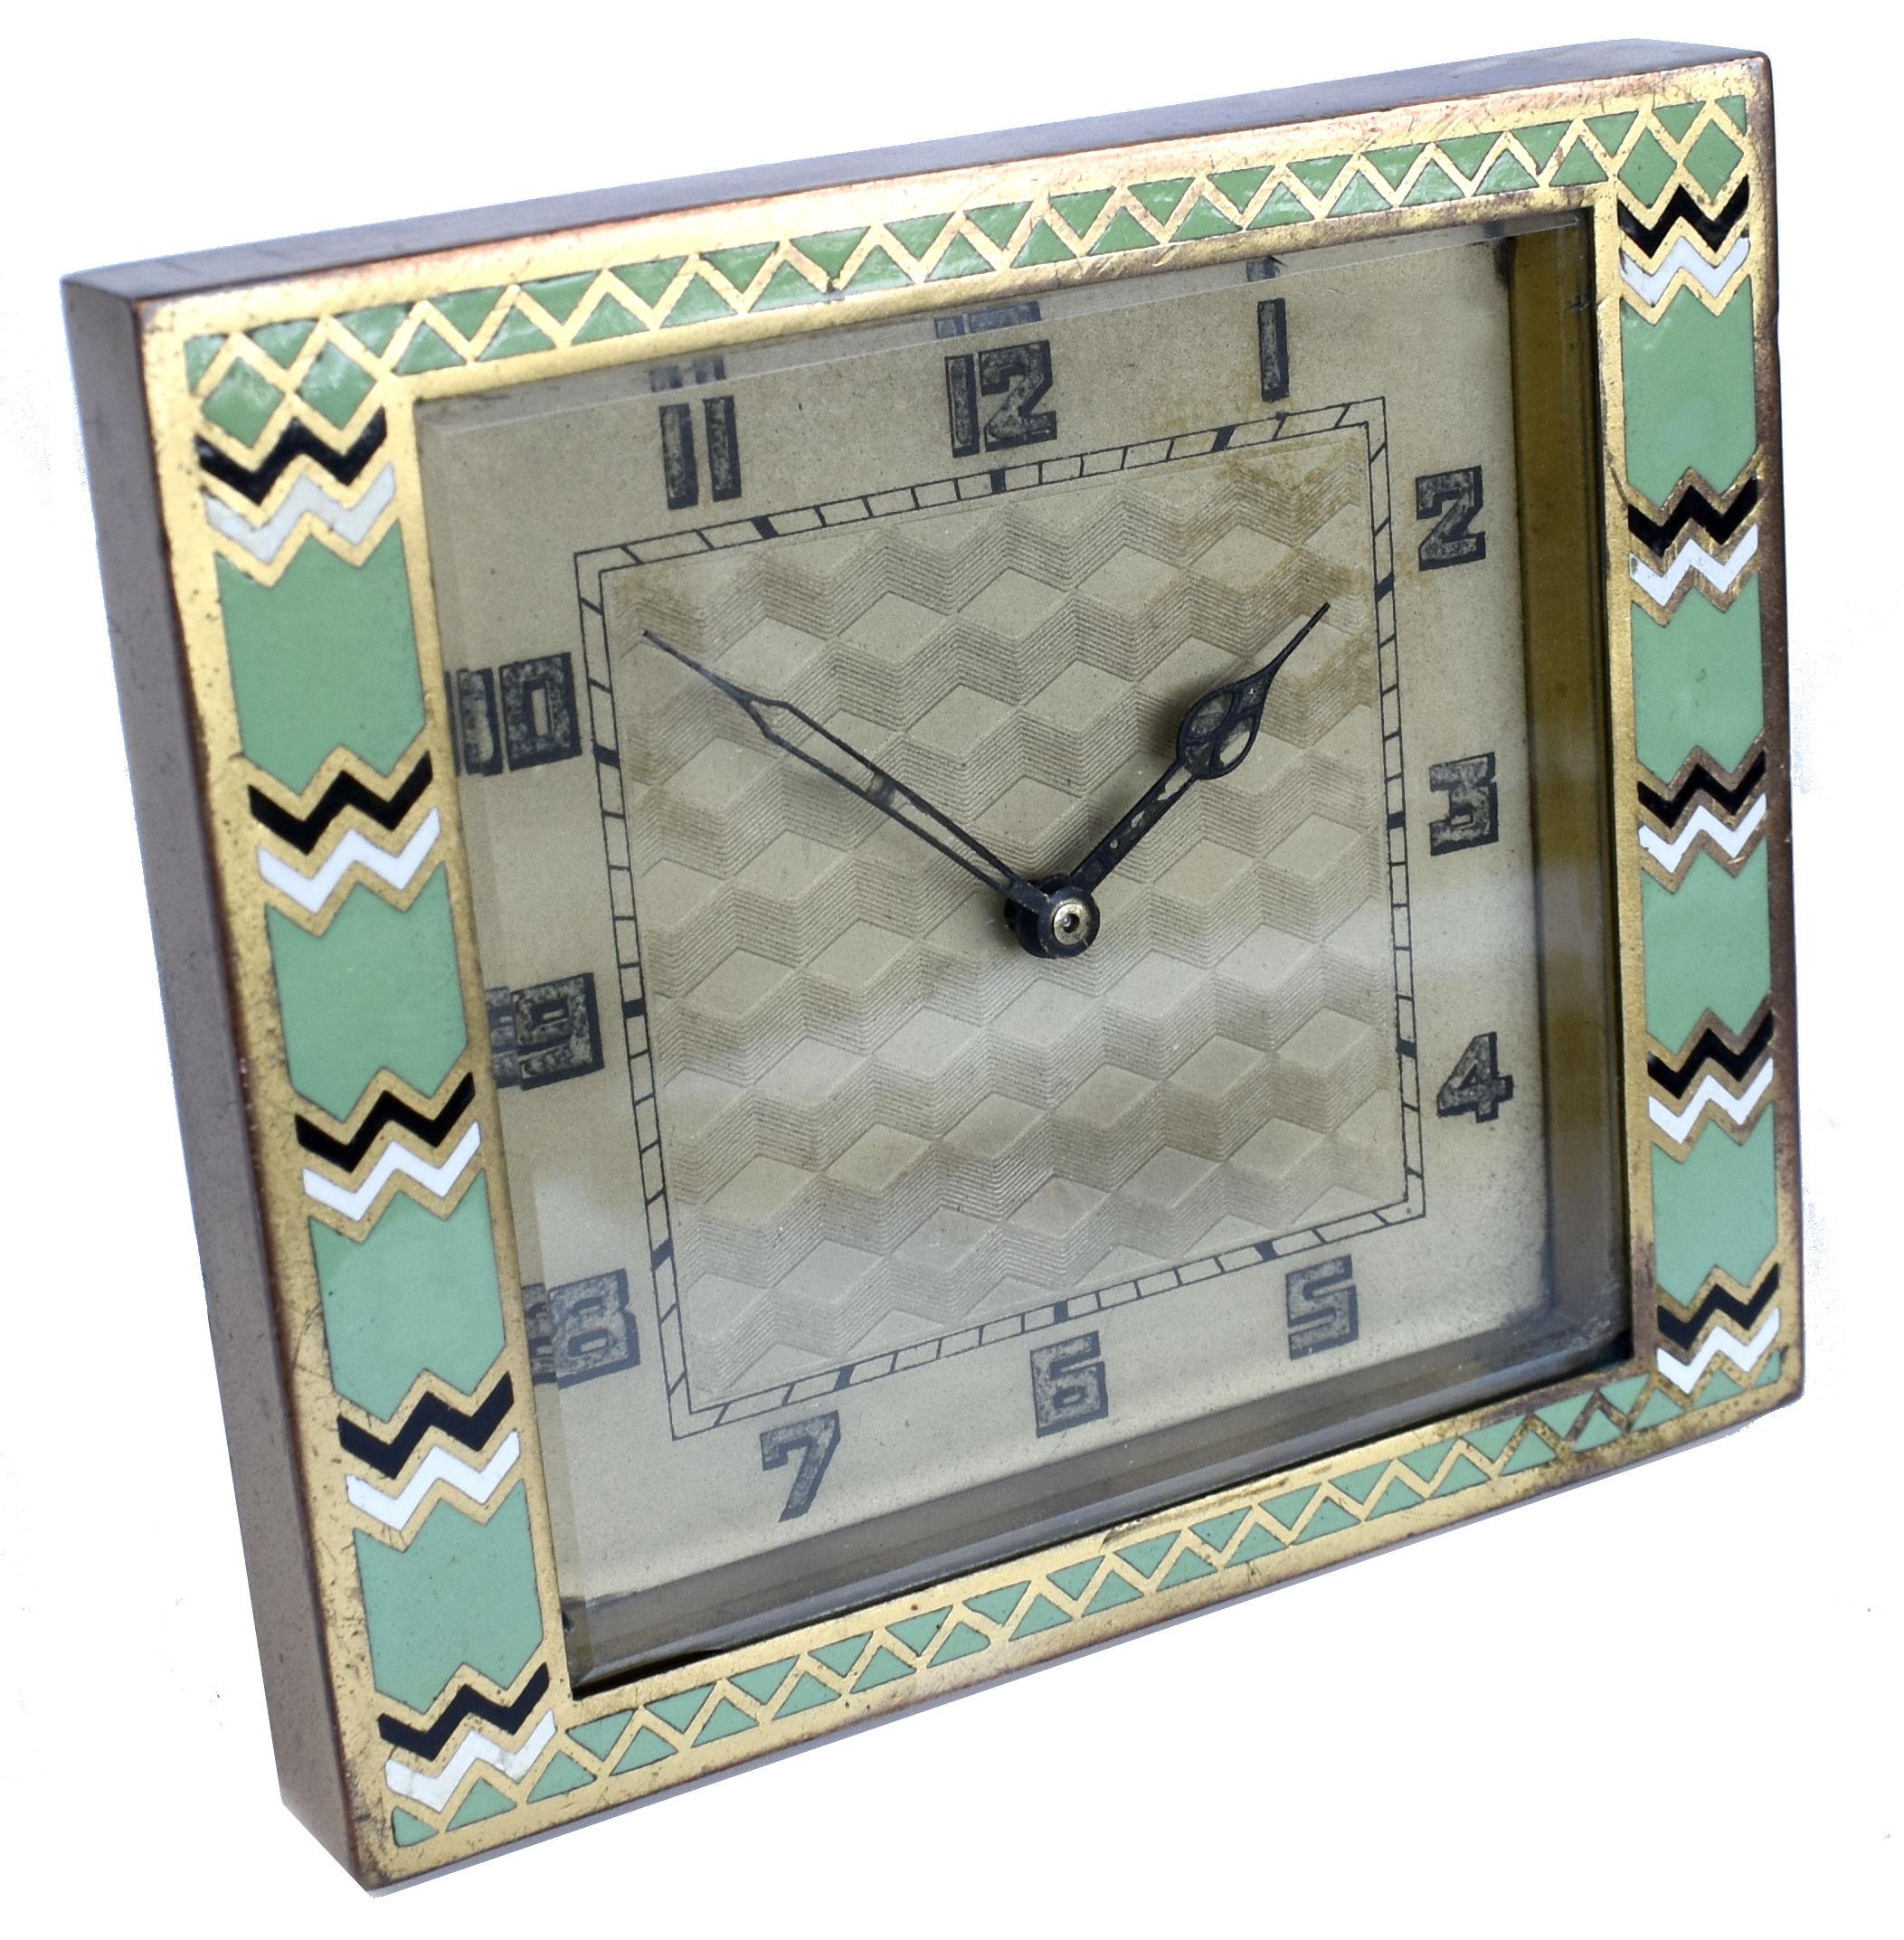 Art Deco Brass And Enamel Clock, English, c1930 In Good Condition For Sale In Devon, England